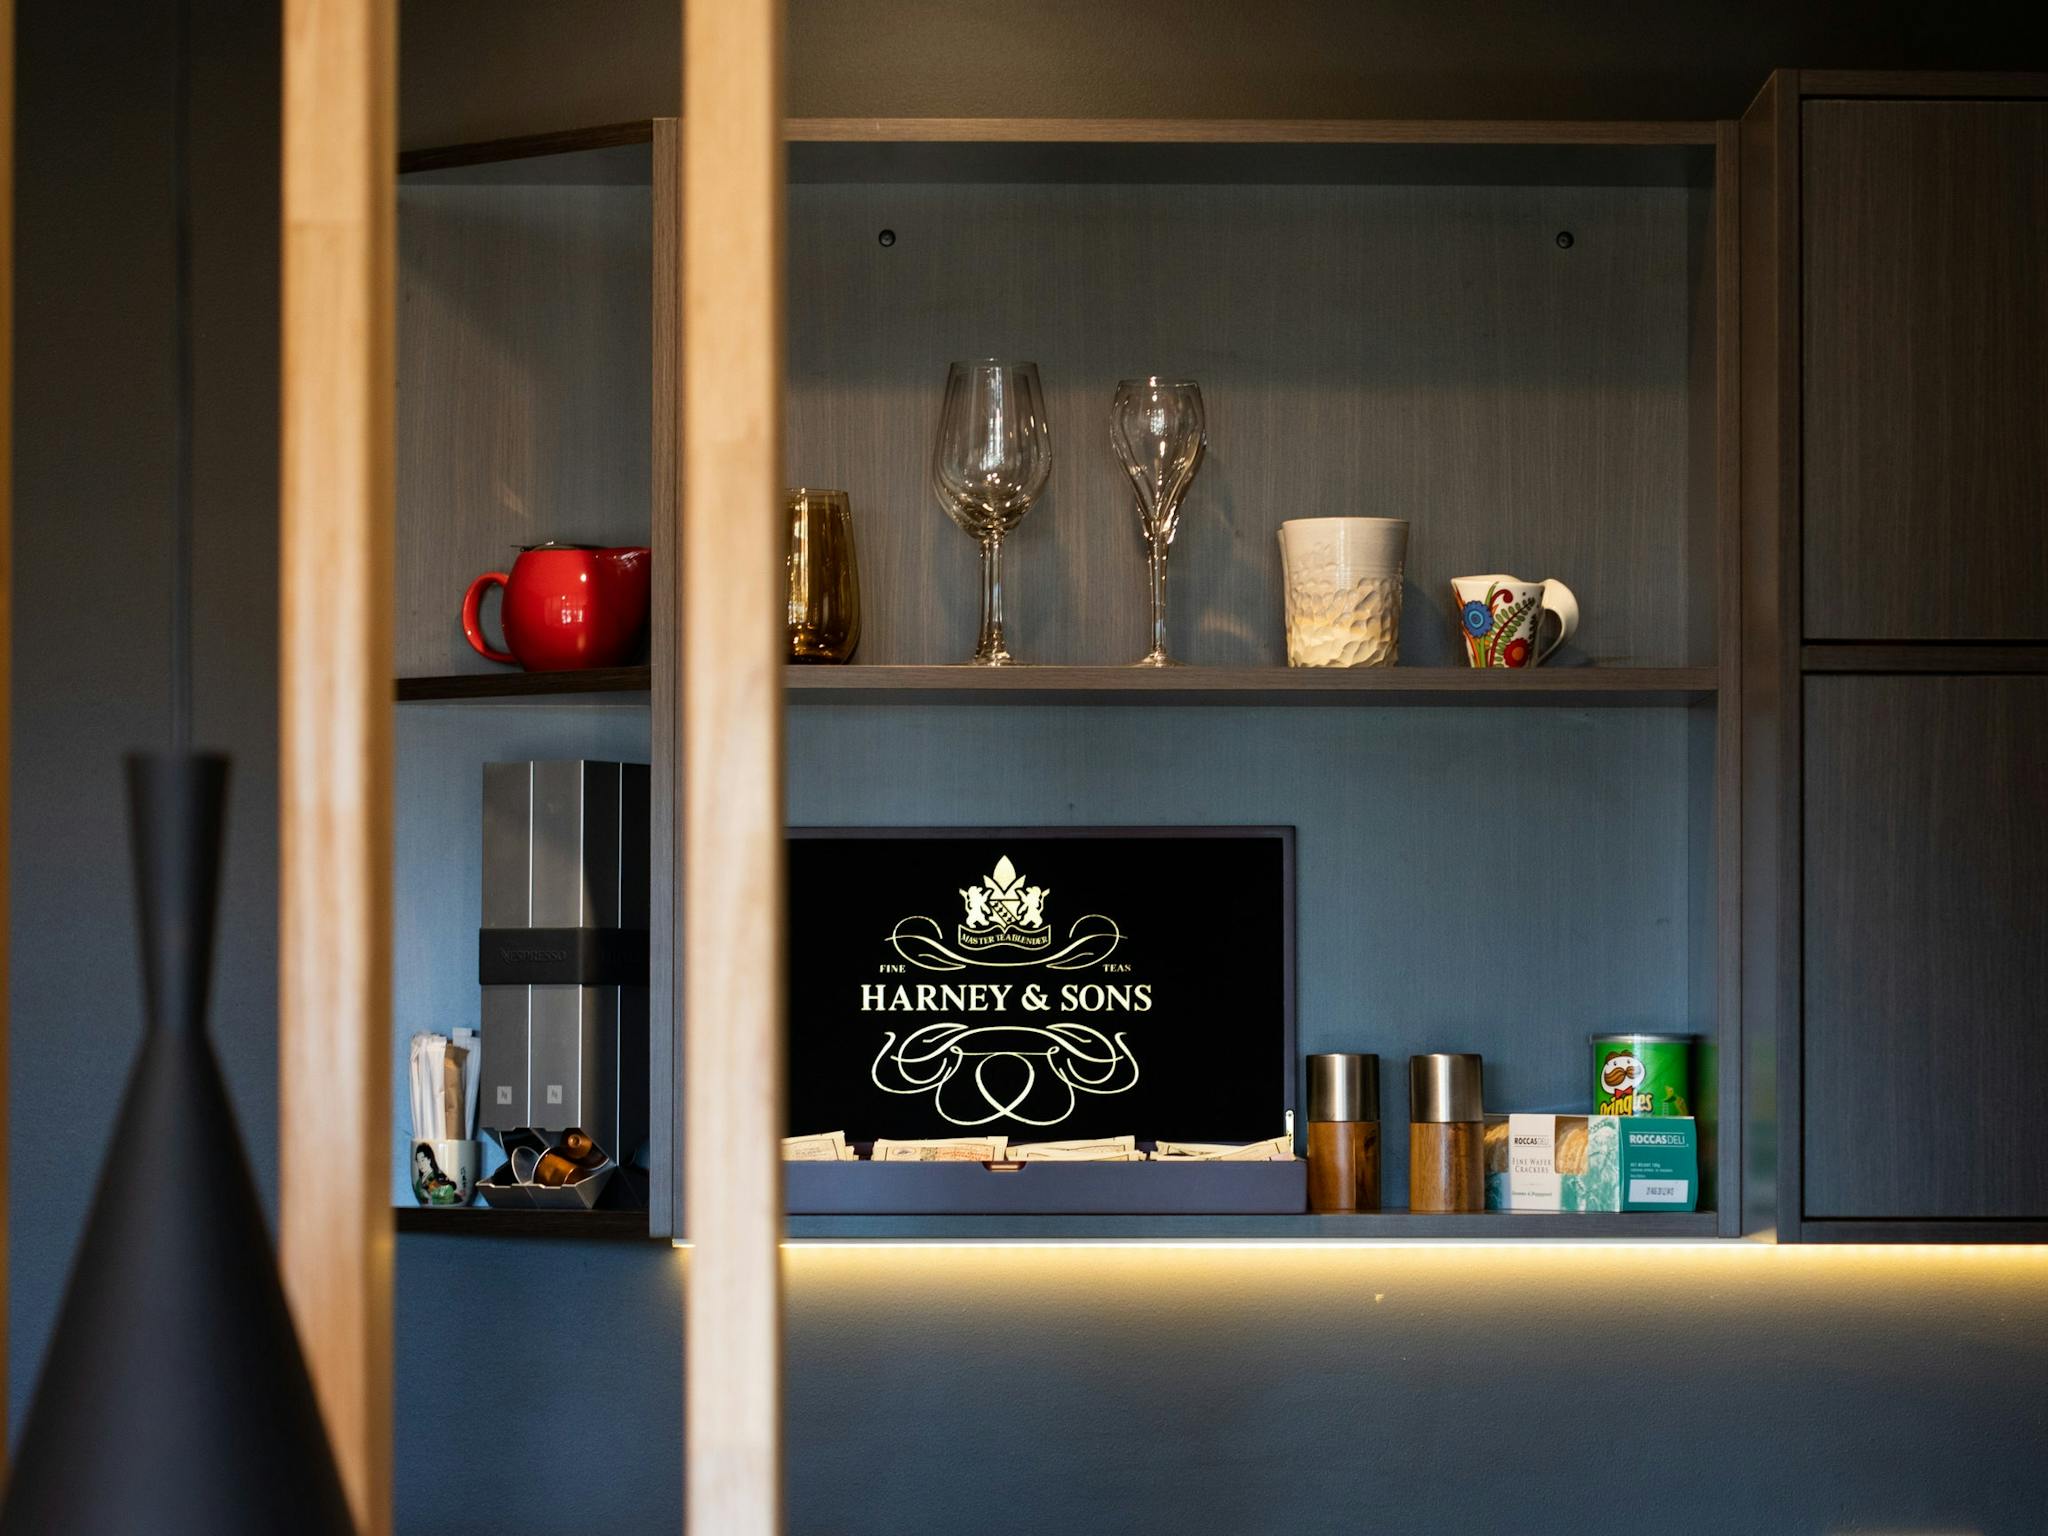 Your kitchenette is stocked with complimentary Harney & Sons tea and Nespresso coffee